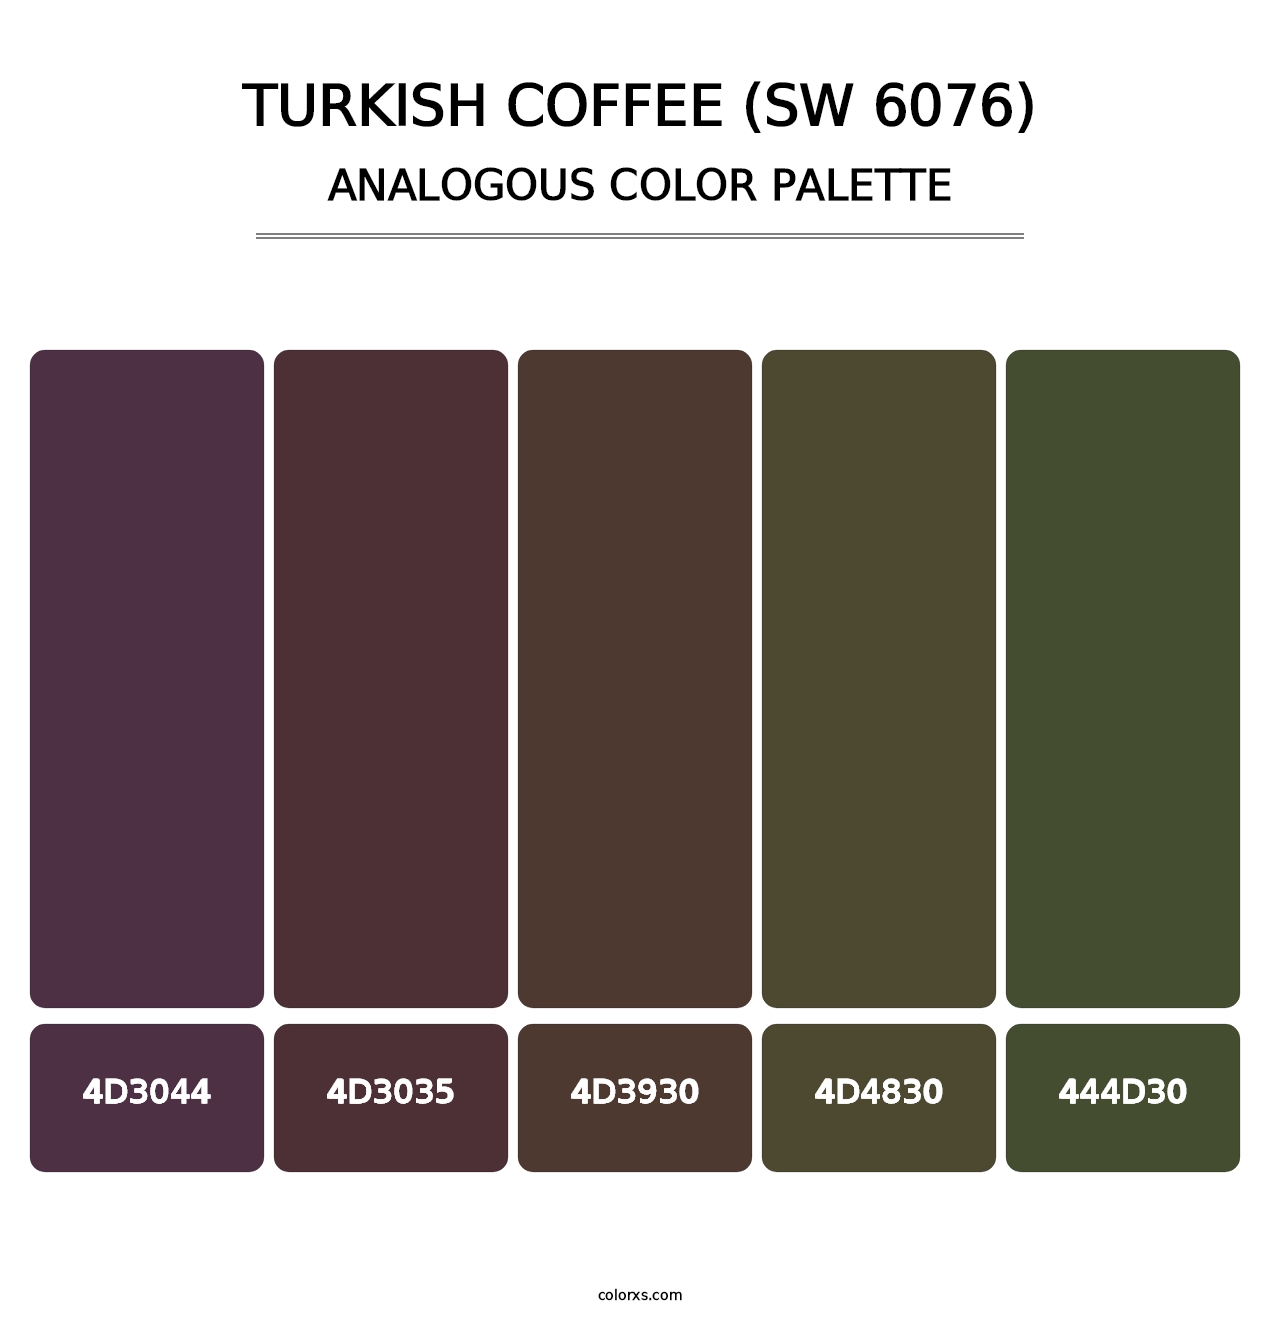 Turkish Coffee (SW 6076) - Analogous Color Palette